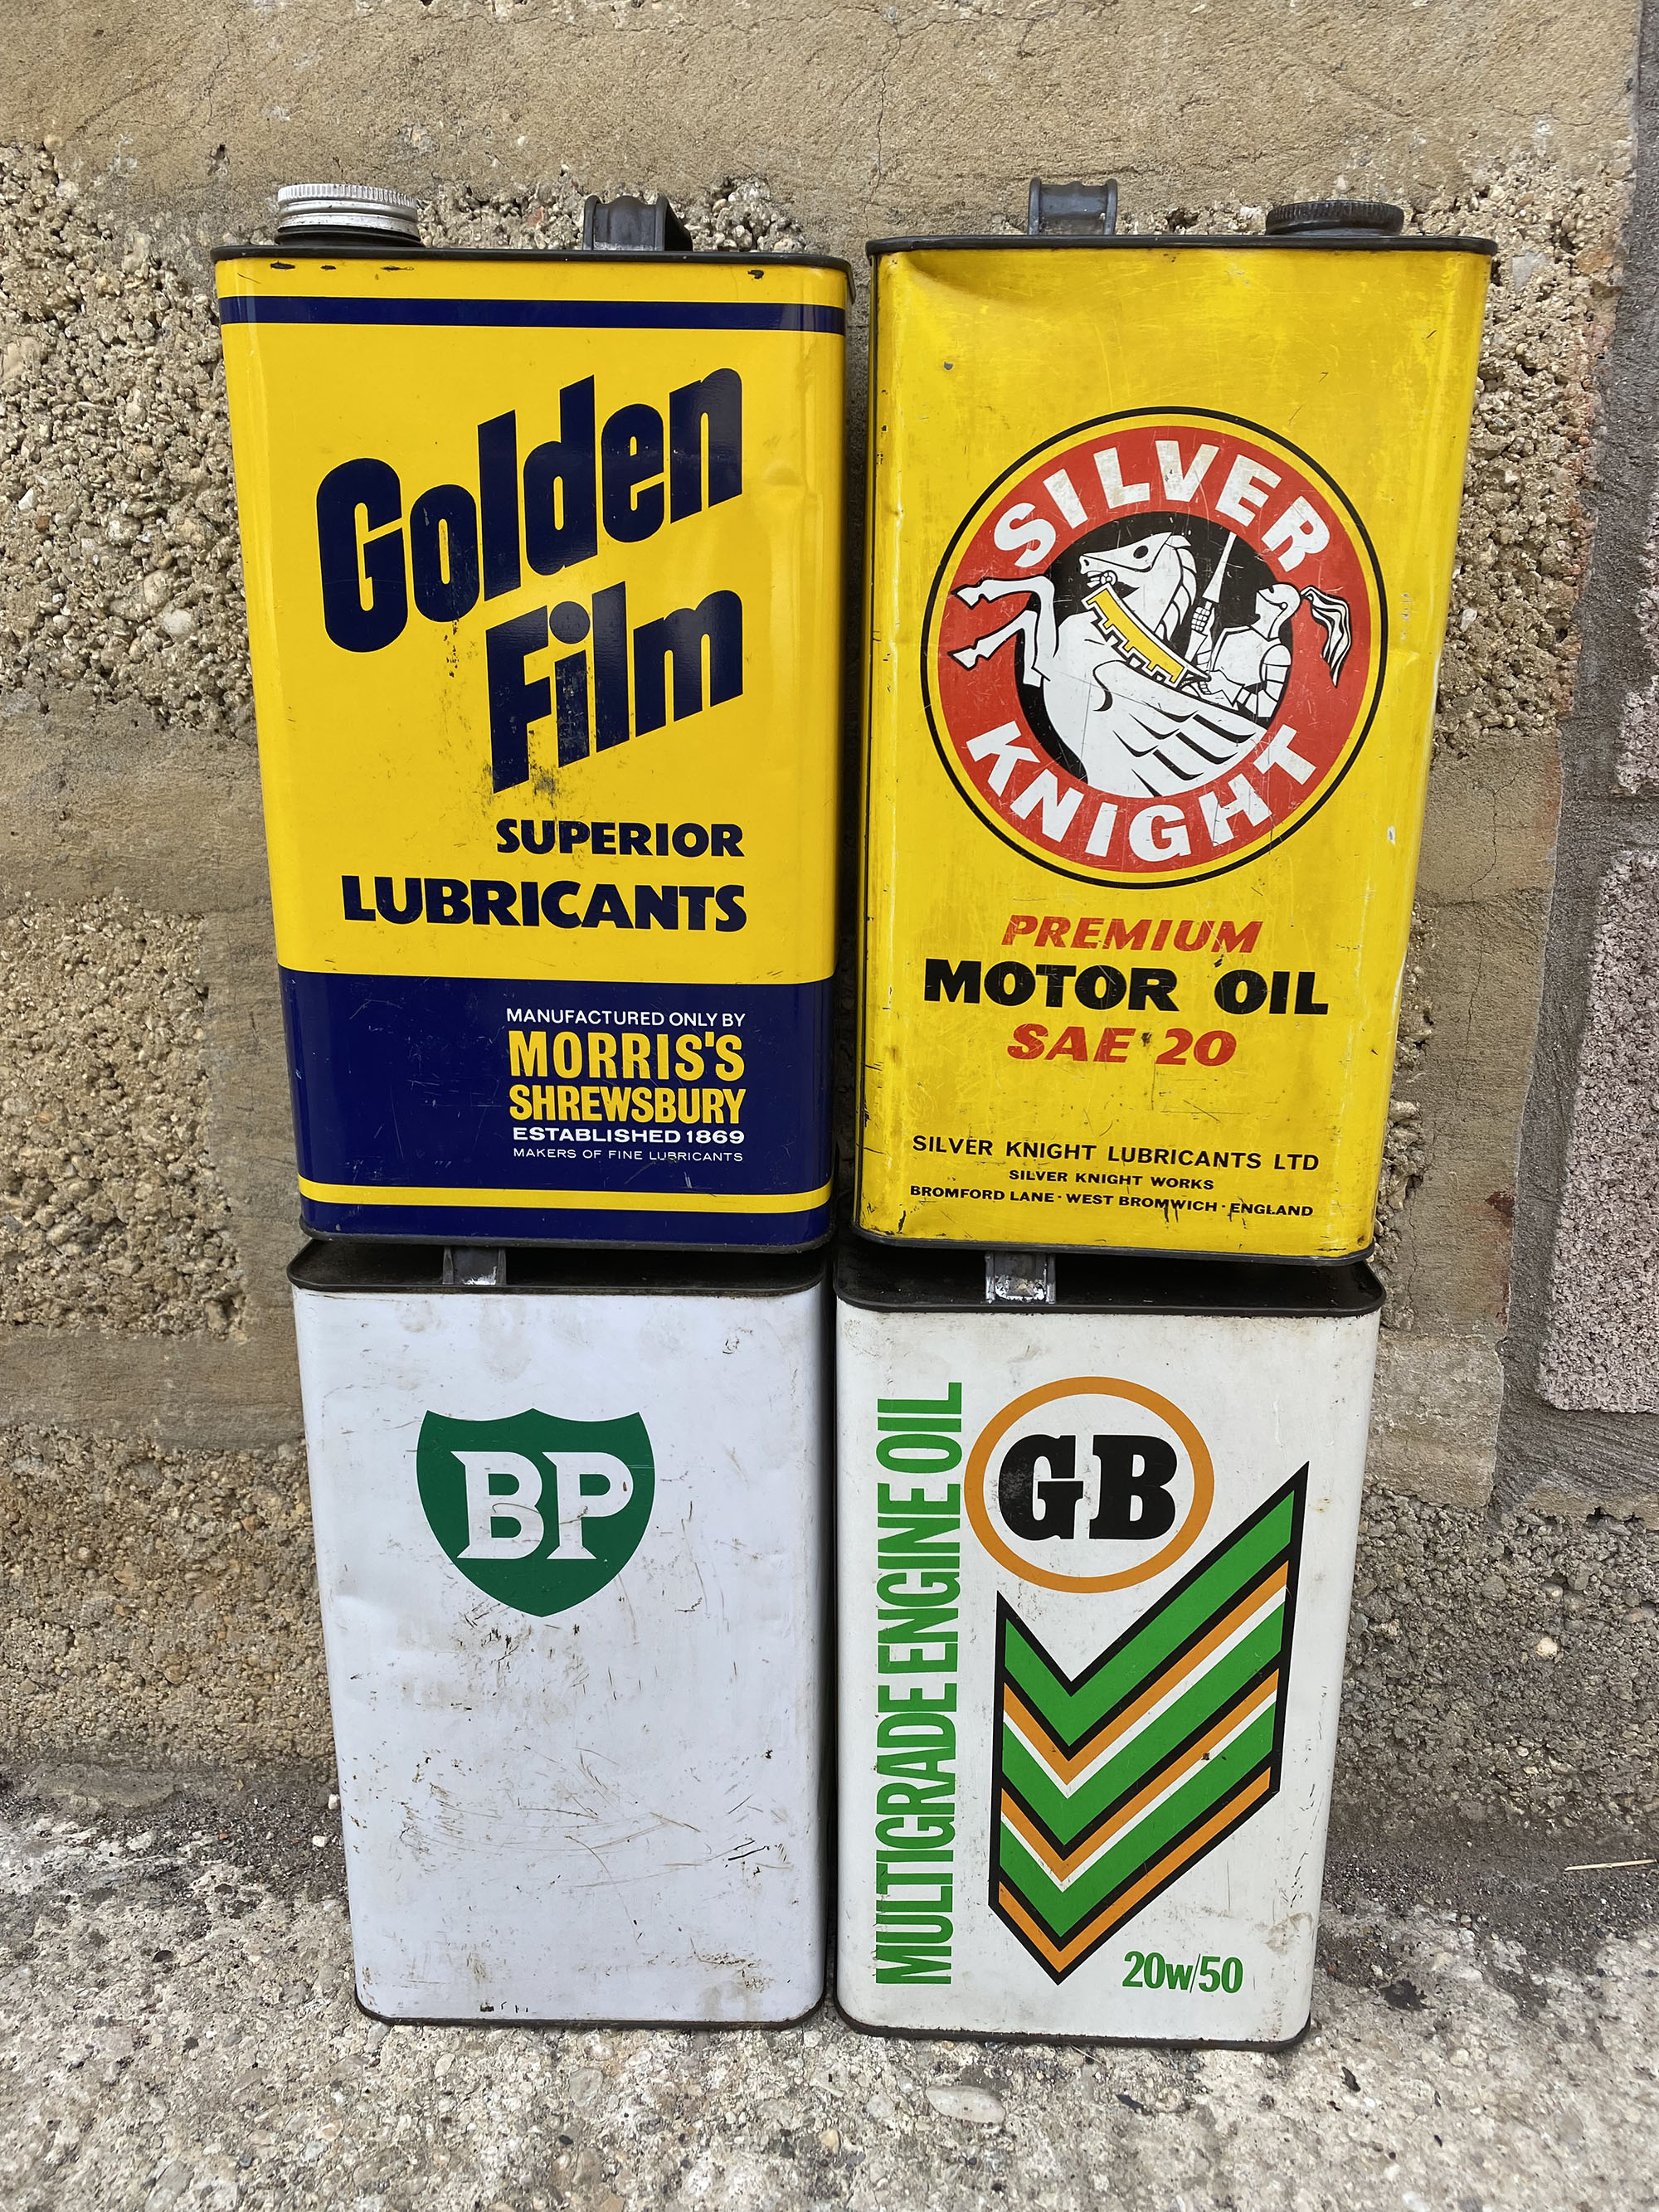 Four gallon cans including Morris's Shrewsbury Golden Film and Silver Knight. - Image 2 of 3